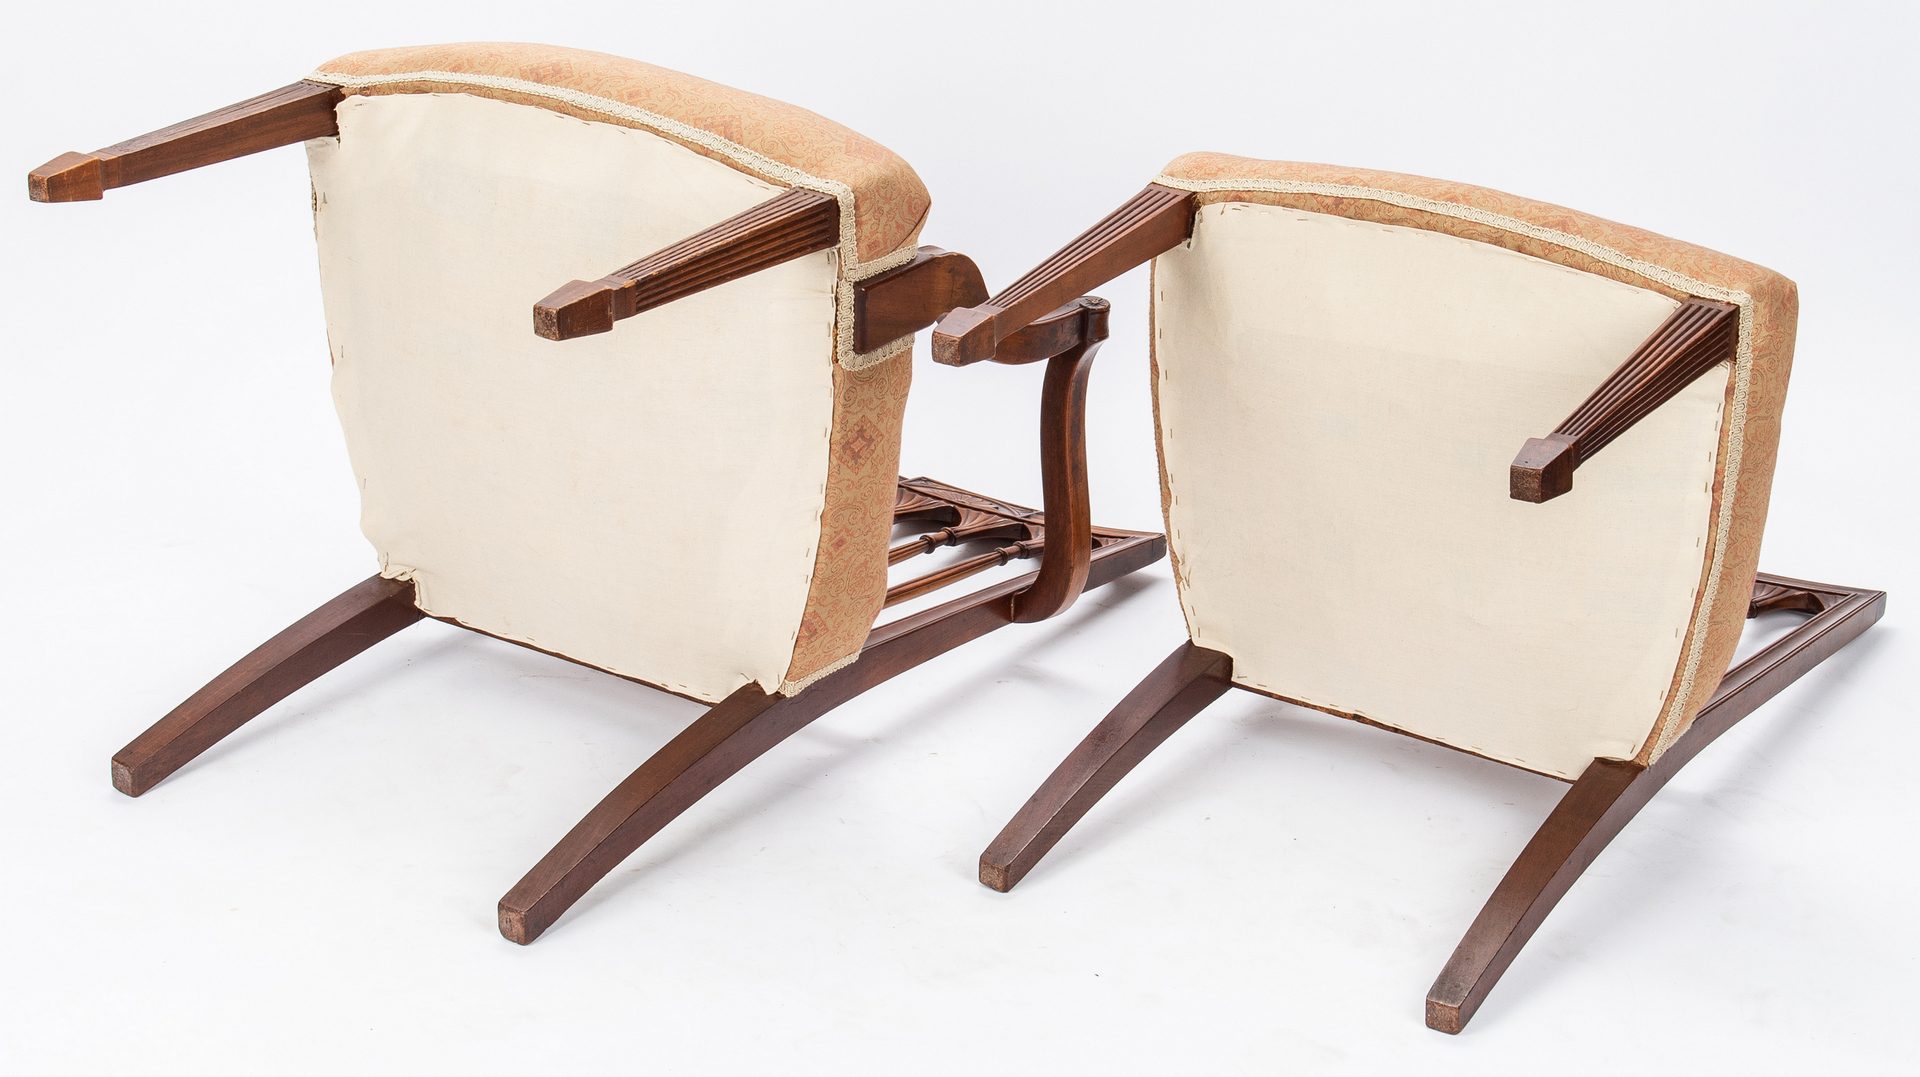 Lot 111: 2 American Federal Square-Back Chairs